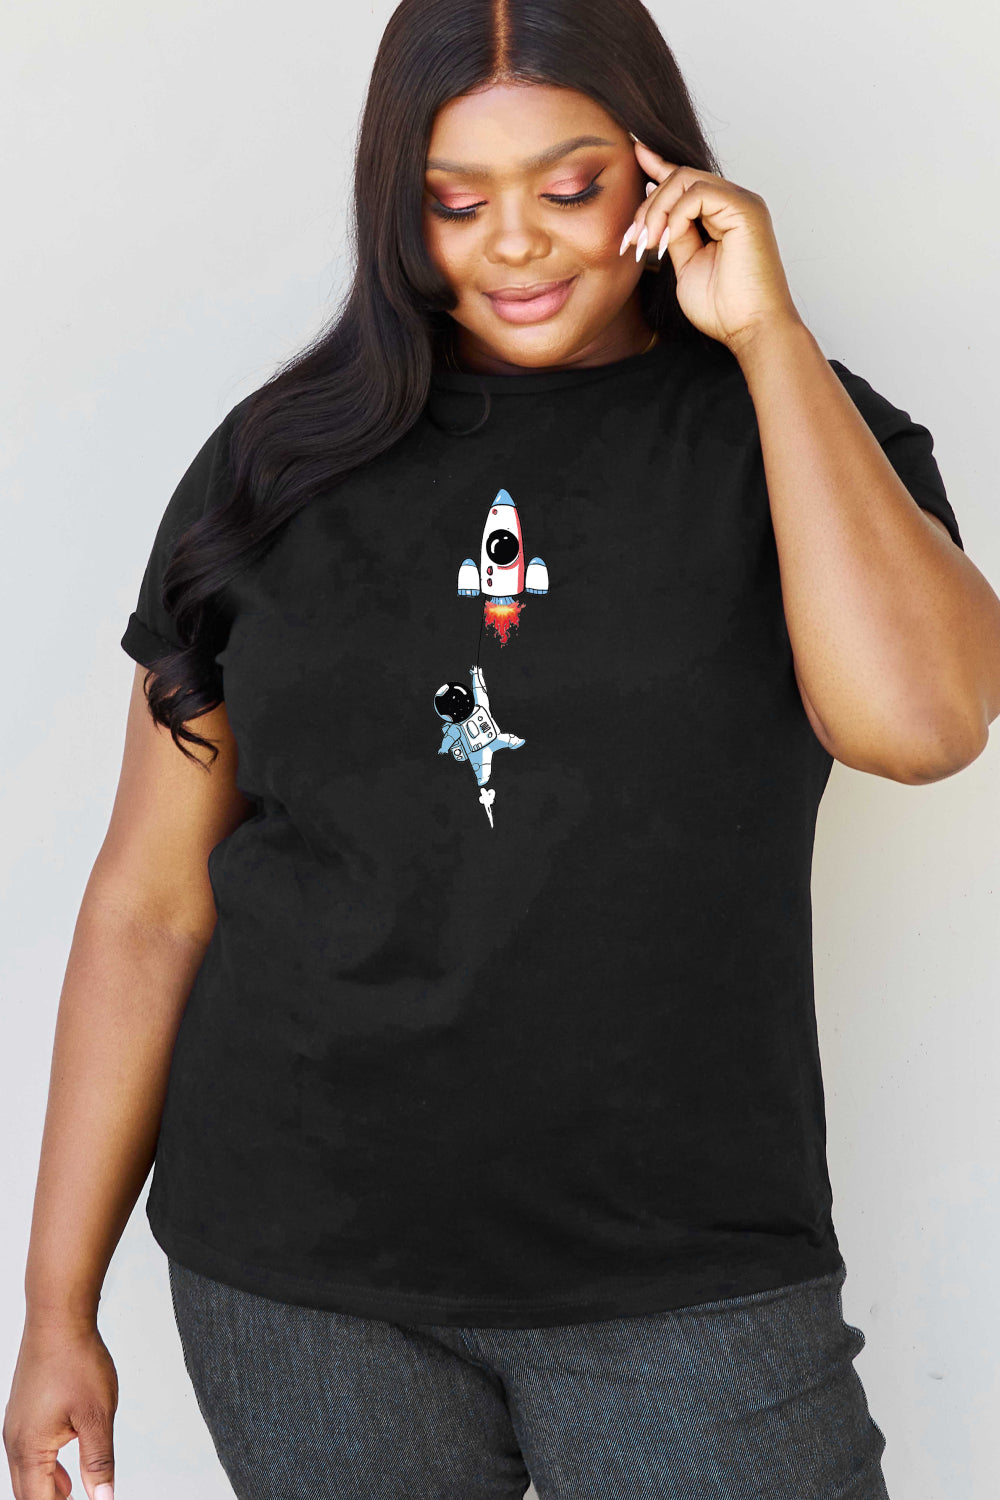 Dark Slate Gray Simply Love Full Size Astronaut Graphic Cotton T-Shirt Graphic Tees